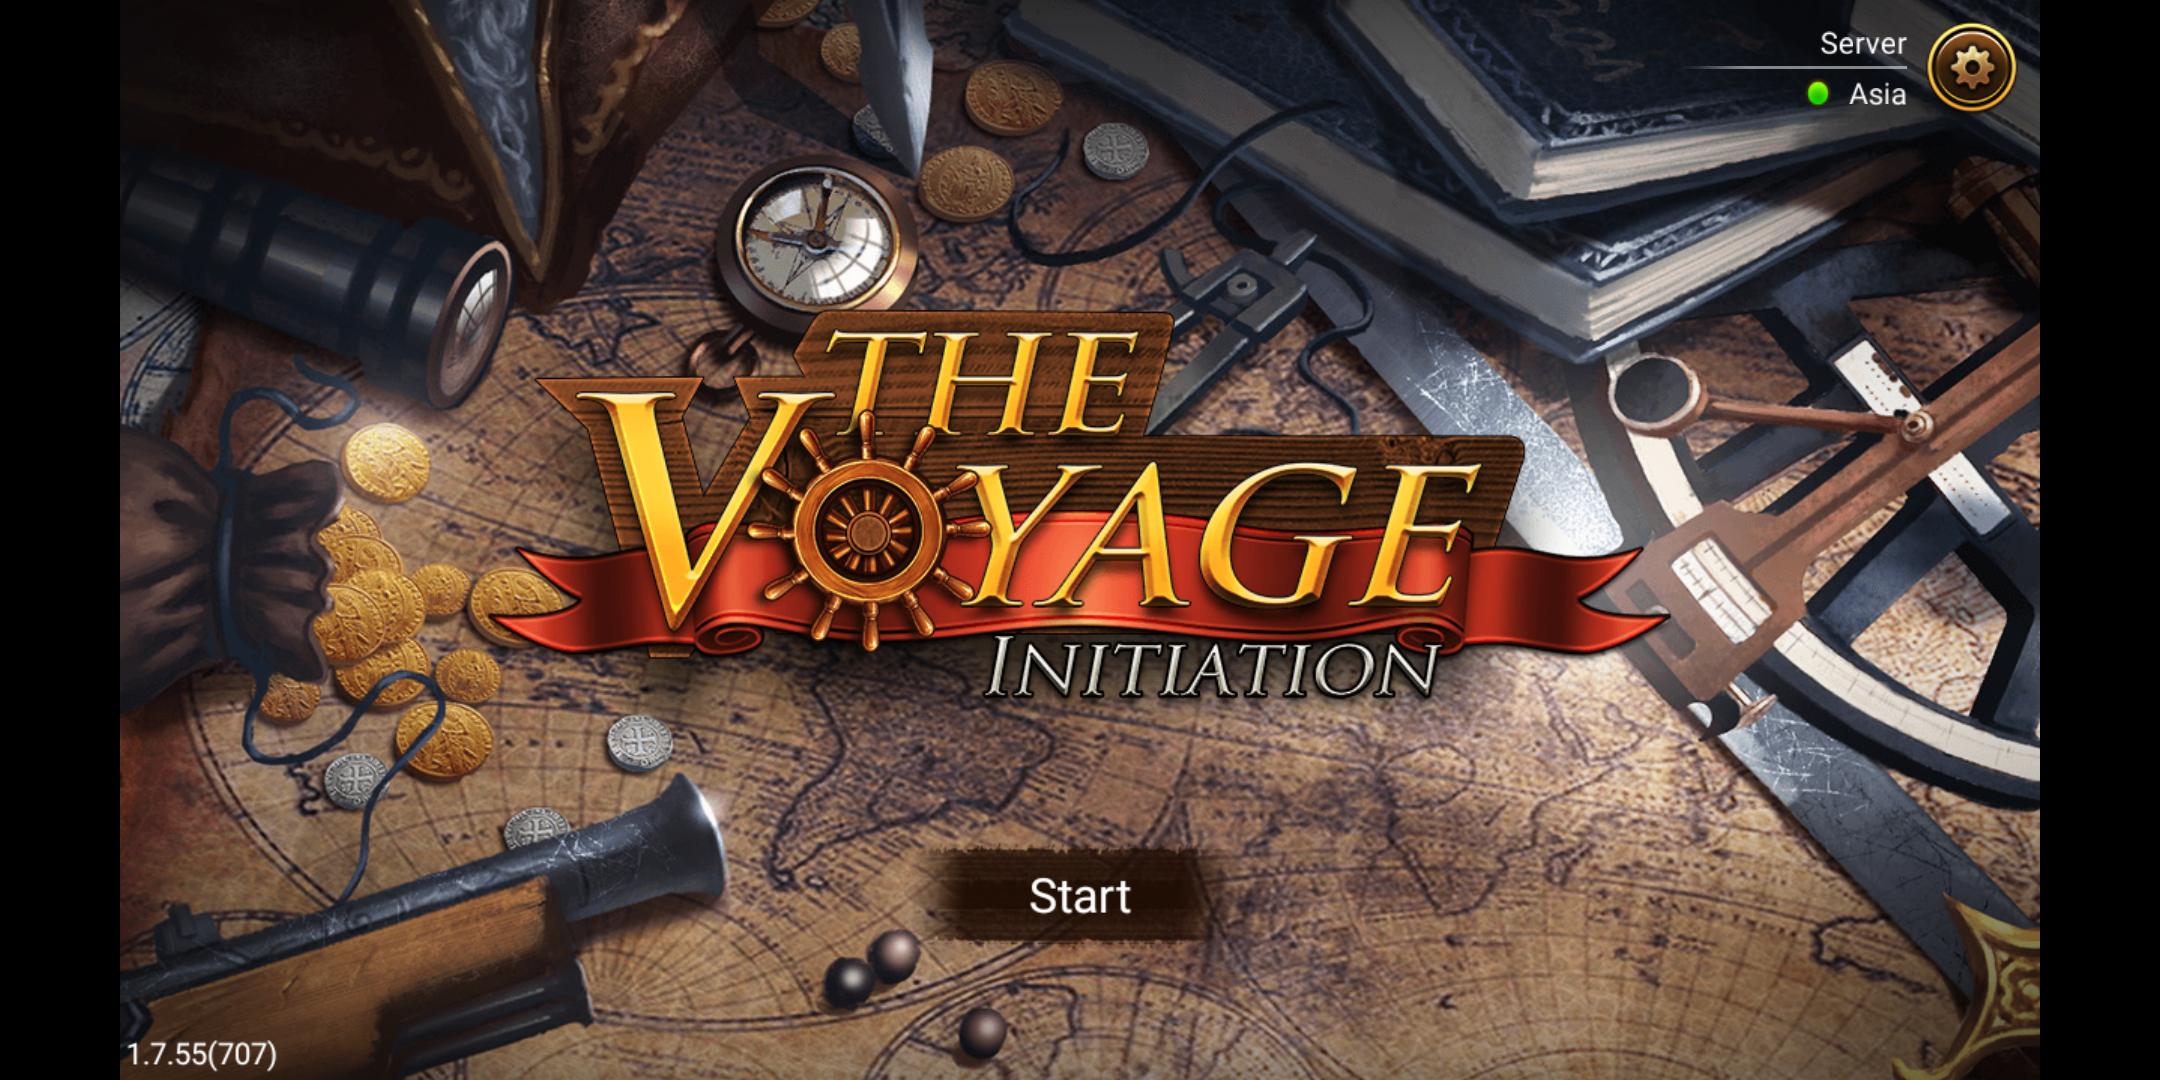 pirate the voyage